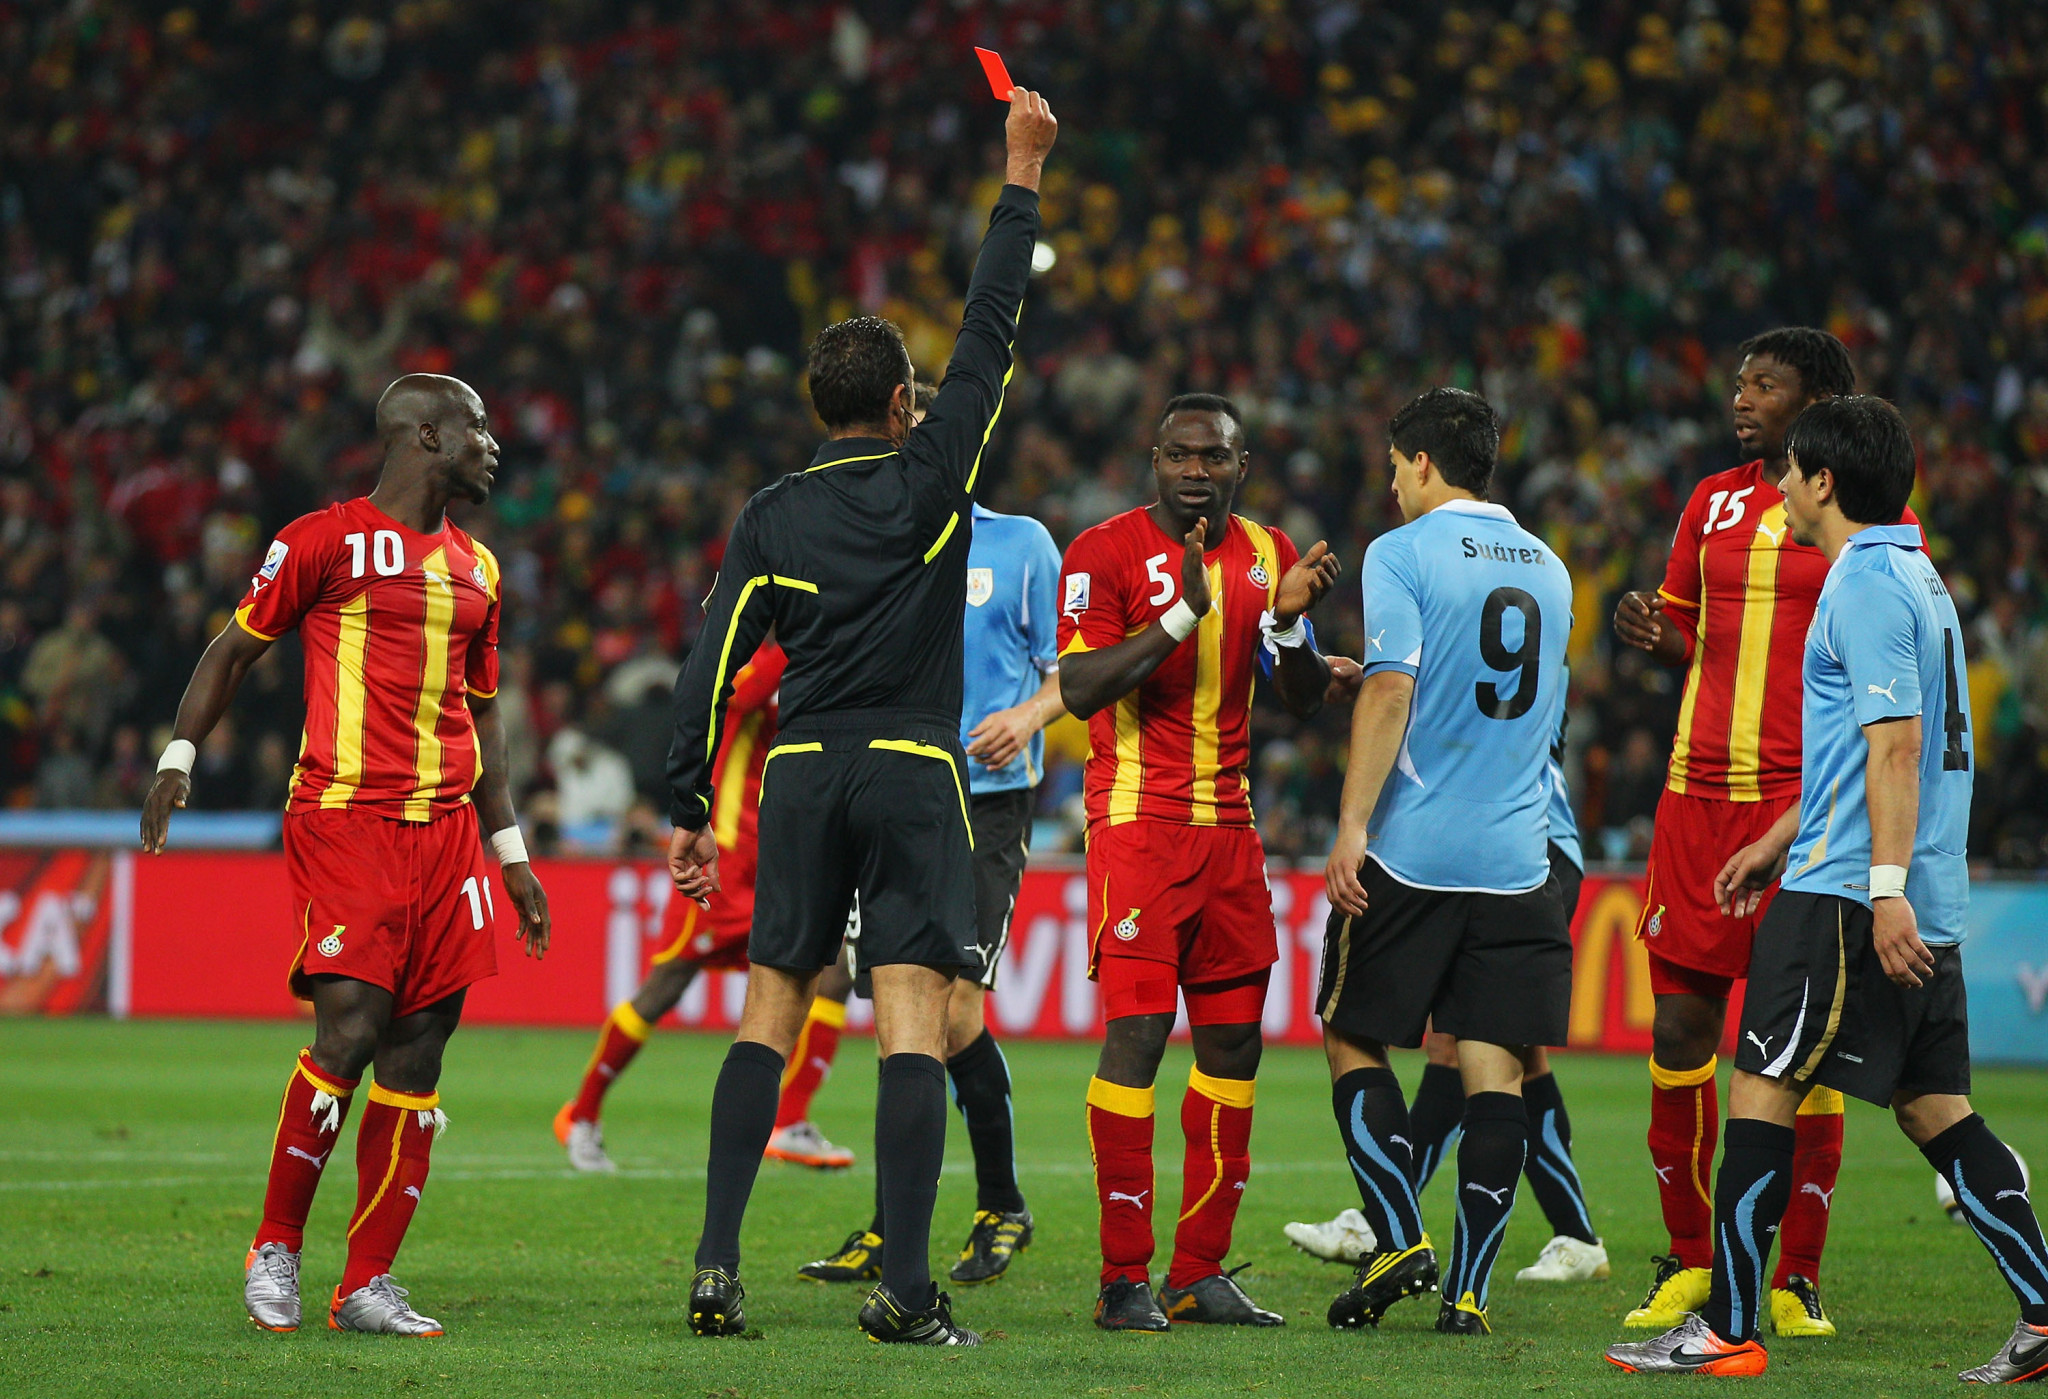 Ghana could not capitalise on Luis Suarez's red card as they missed the resultant penalty ©Getty Images